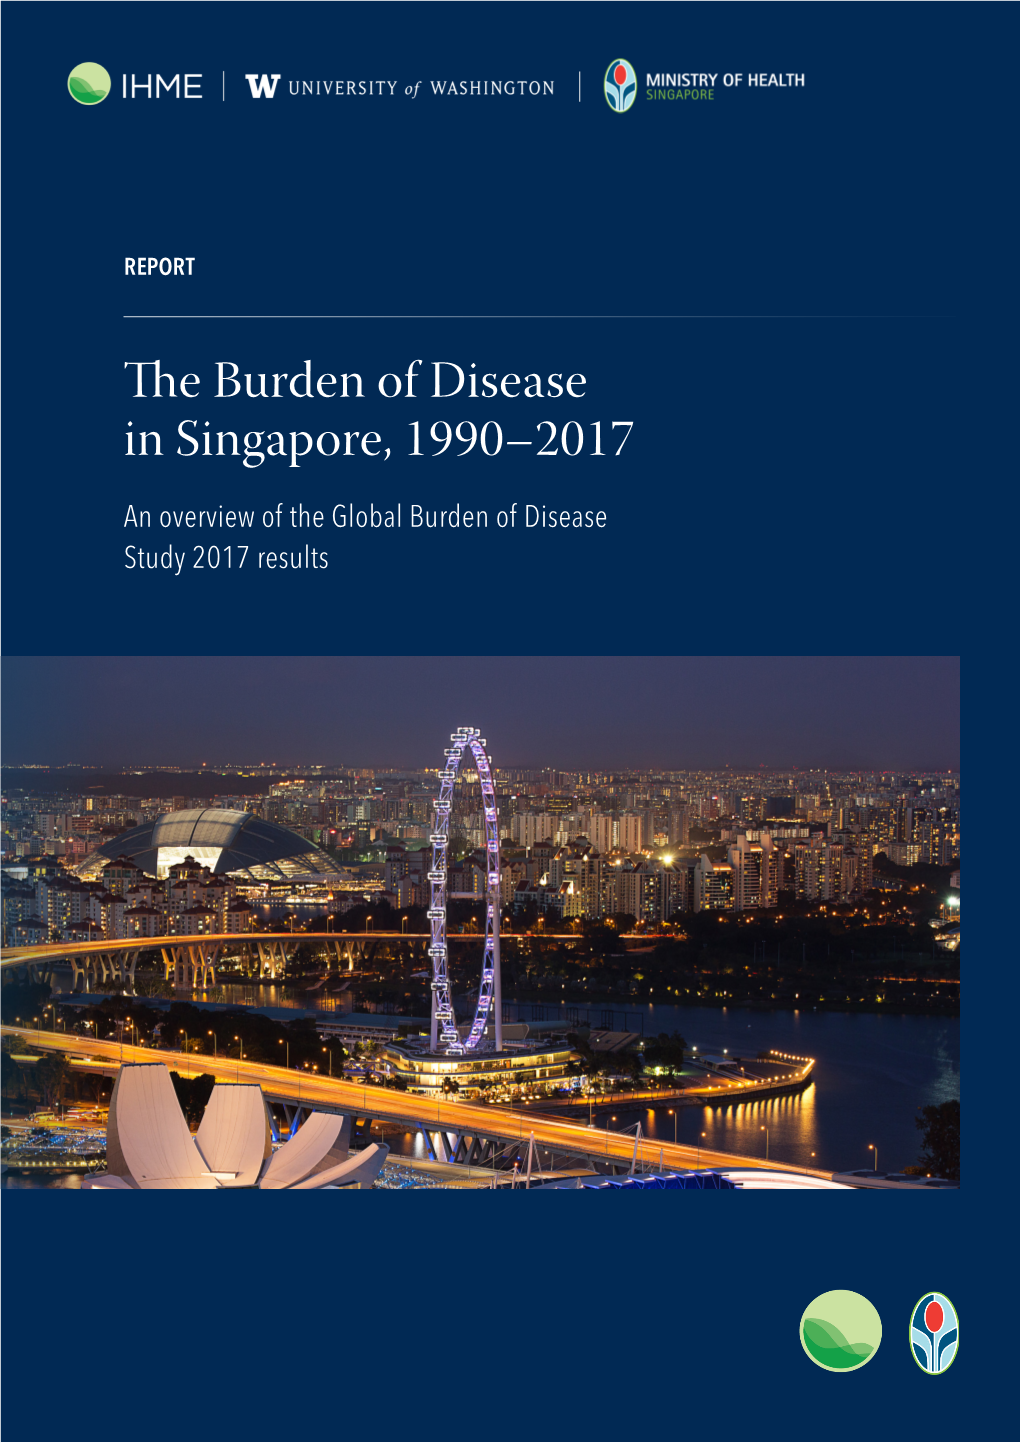 The Burden of Disease in Singapore, 1990–2017 an Overview of the Global Burden of Disease Study 2017 Results